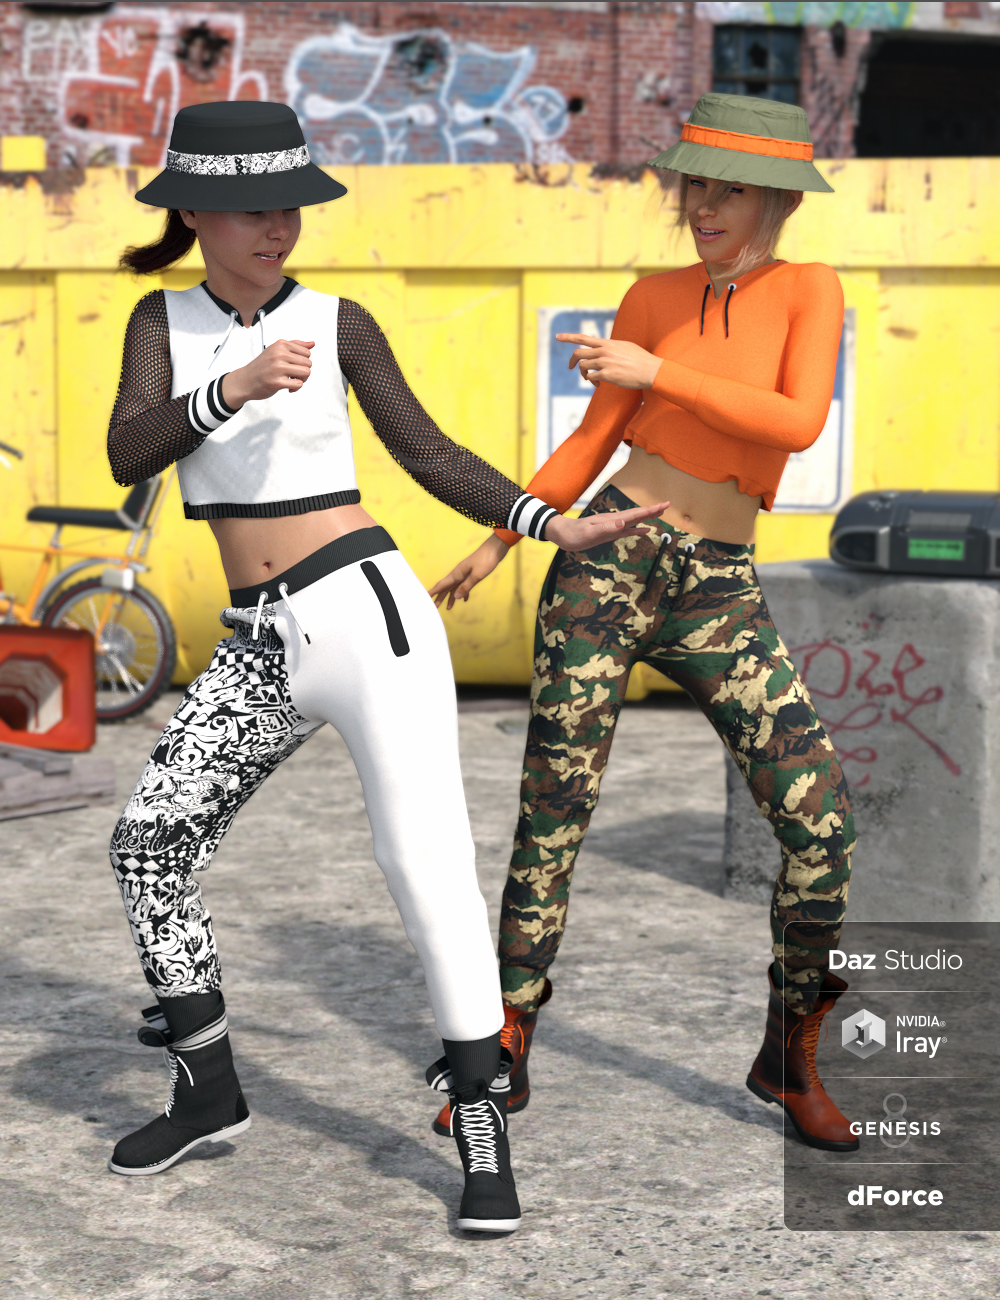 dForce Body Pop Outfit Textures by: Moonscape GraphicsSade, 3D Models by Daz 3D